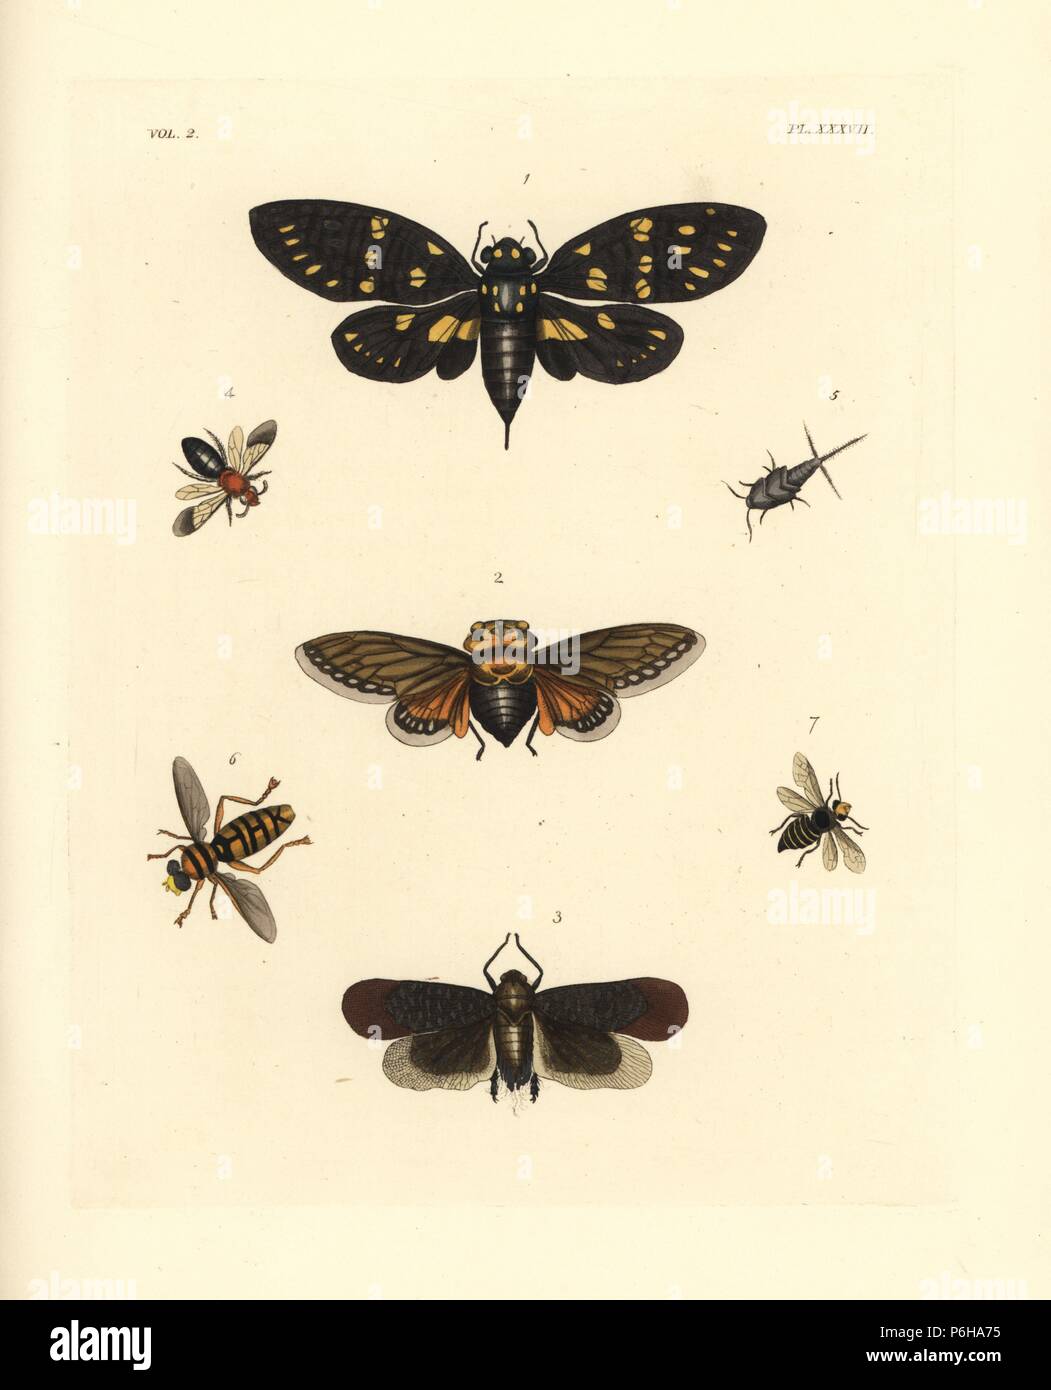 Speckled black cicada, Gaeana maculata 1, Platypleura capensis 2, Lystra lanata 3, Andrena thoracica 4, Acrotelsa collaris 5, hoverfly, Milesia virginiensis 6, and paper wasp, polistes annularis 7. Handcoloured lithograph from John O. Westwood's new edition of Dru Drury's 'Illustrations of Exotic Entomology,' Bohn, London, 1837. Stock Photo